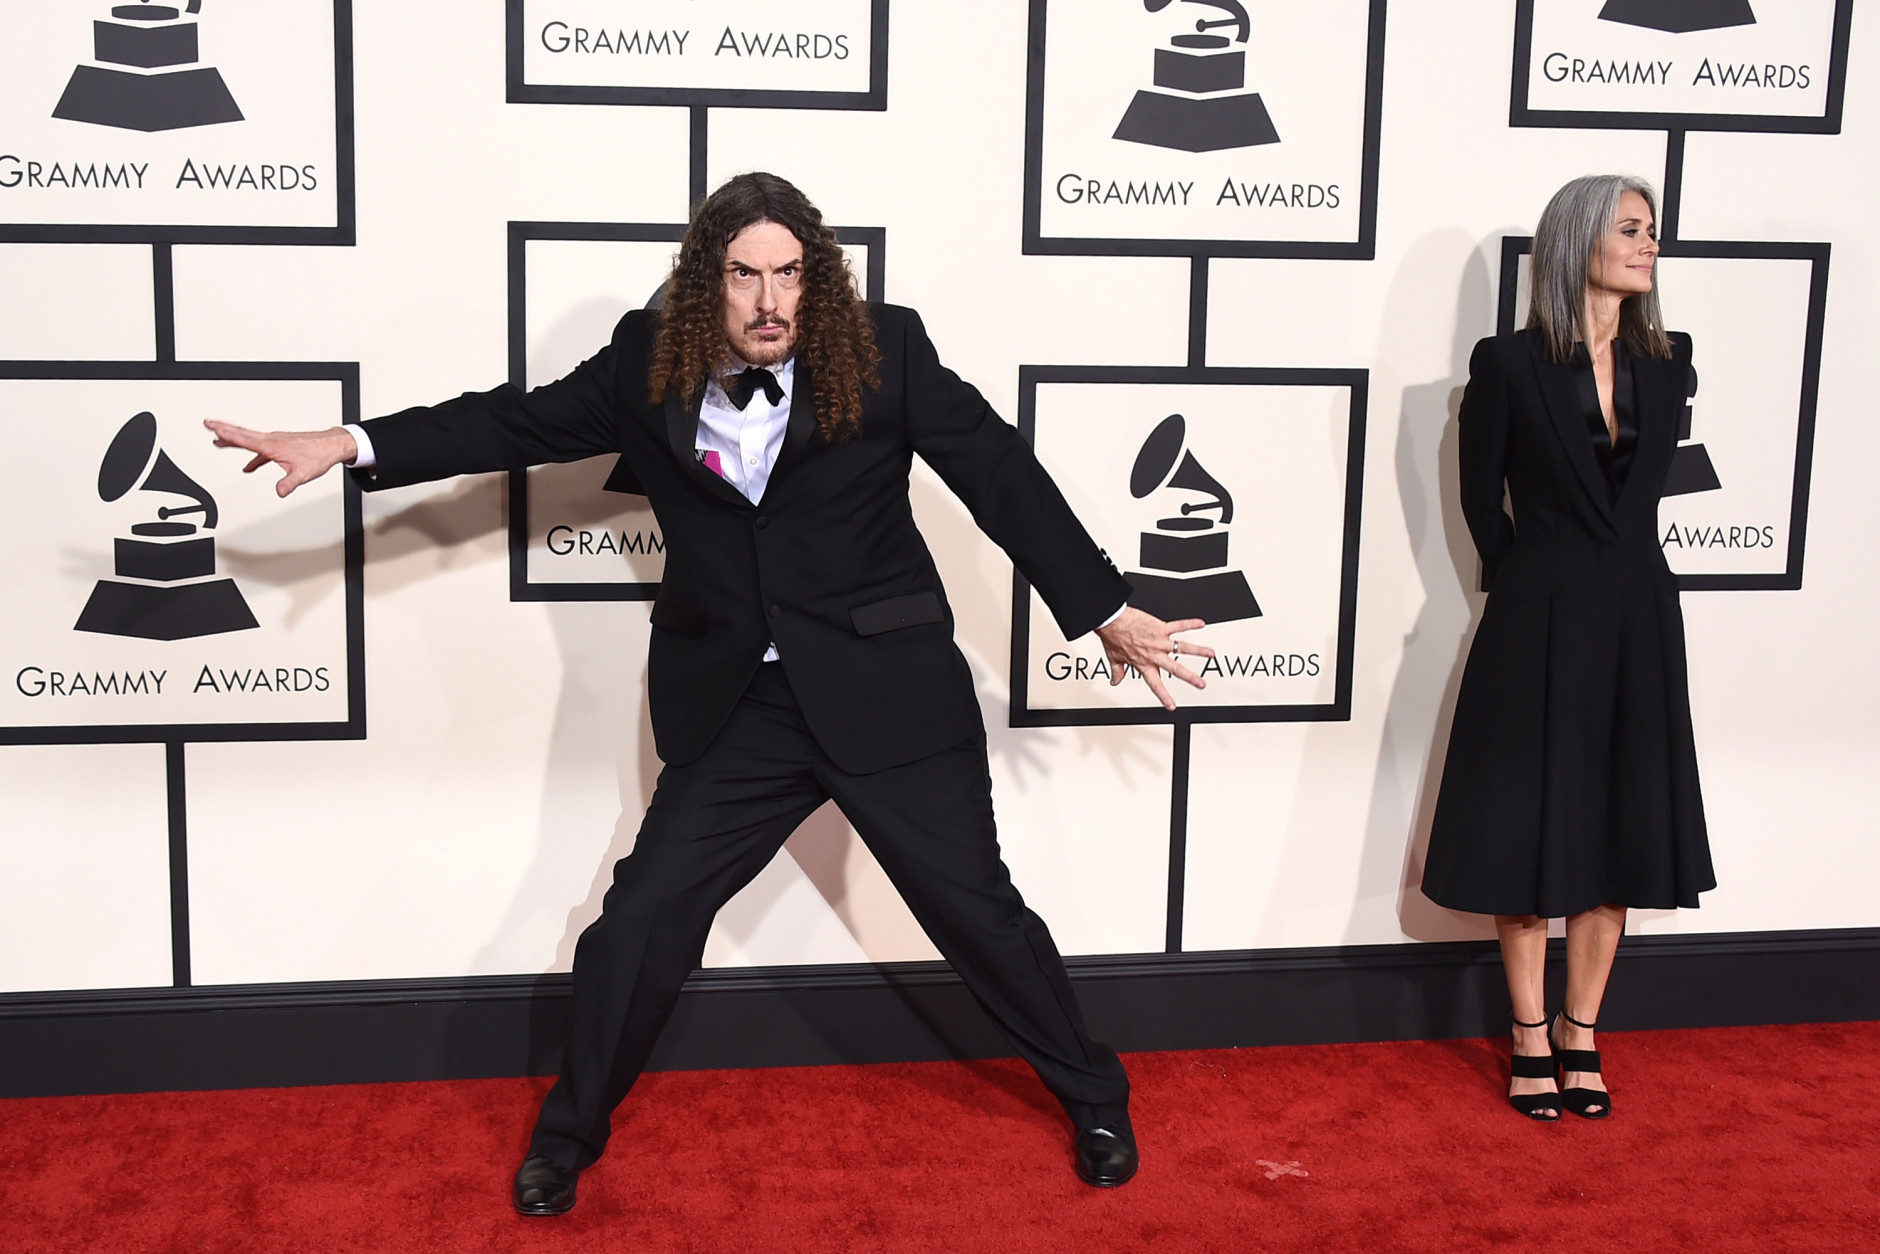 "Weird Al" Yankovic, left and Suzanne Krajewski arrive at the 57th annual Grammy Awards at the Staples Center on Sunday, Feb. 8, 2015, in Los Angeles. (Photo by Jordan Strauss/Invision/AP)